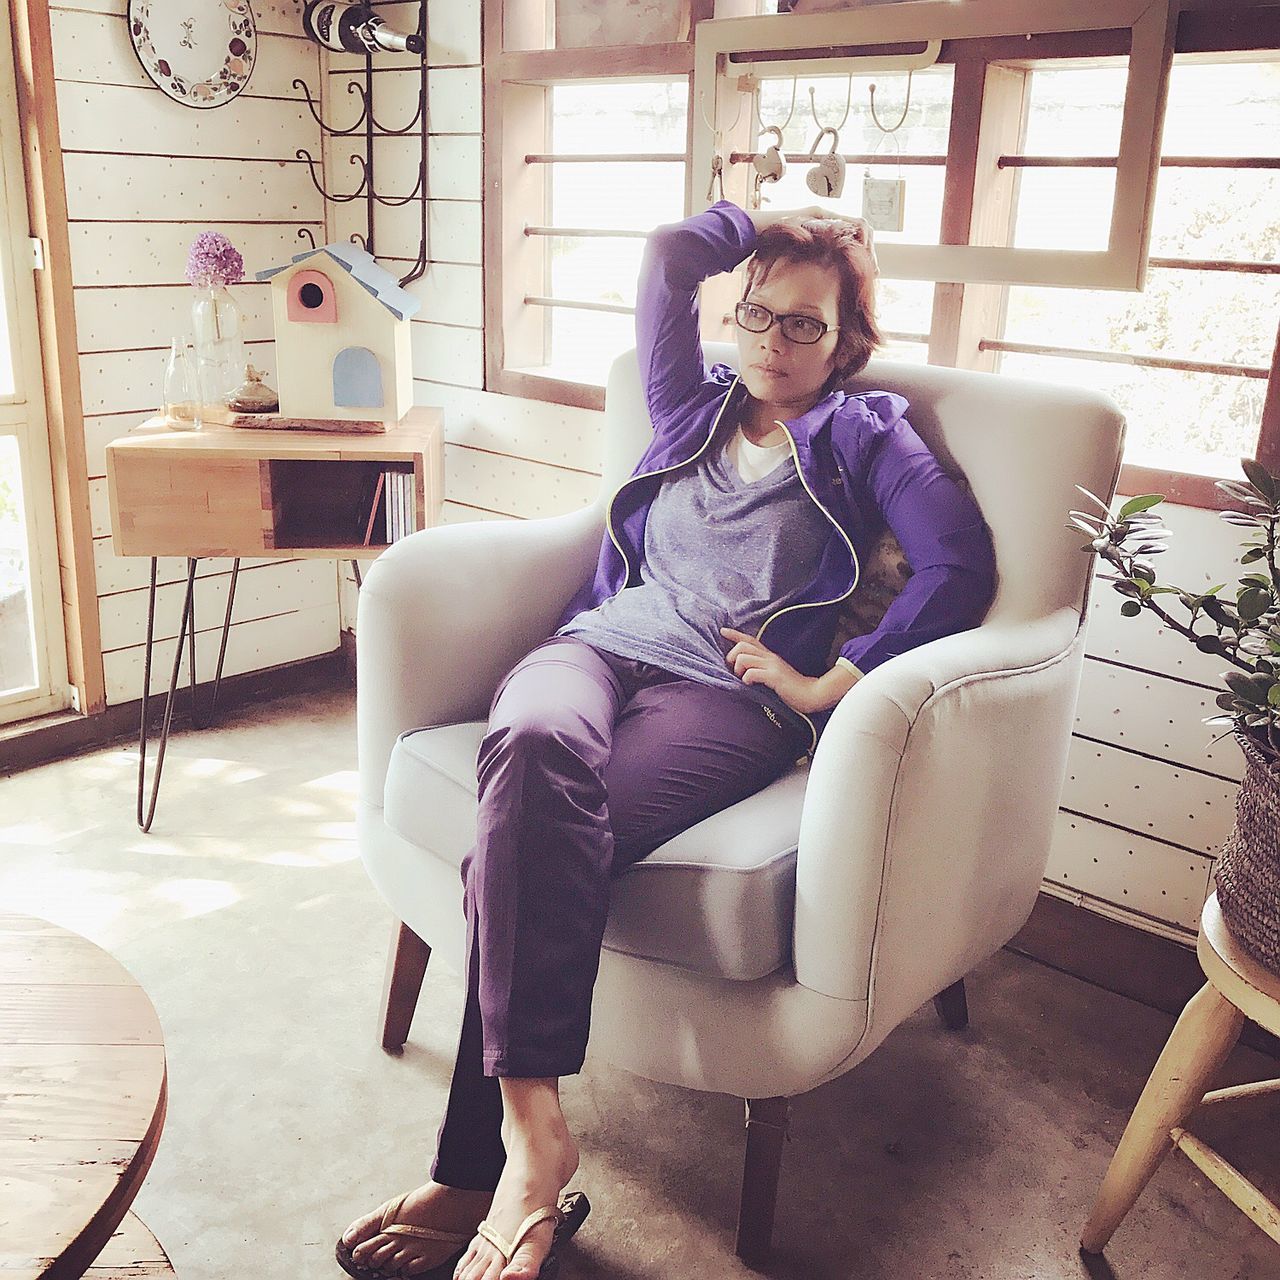 full length, sitting, one person, real people, indoors, casual clothing, home interior, front view, mature adult, mature women, looking at camera, young adult, eyeglasses, lifestyles, chair, portrait, young women, leisure activity, wireless technology, technology, beautiful woman, day, people